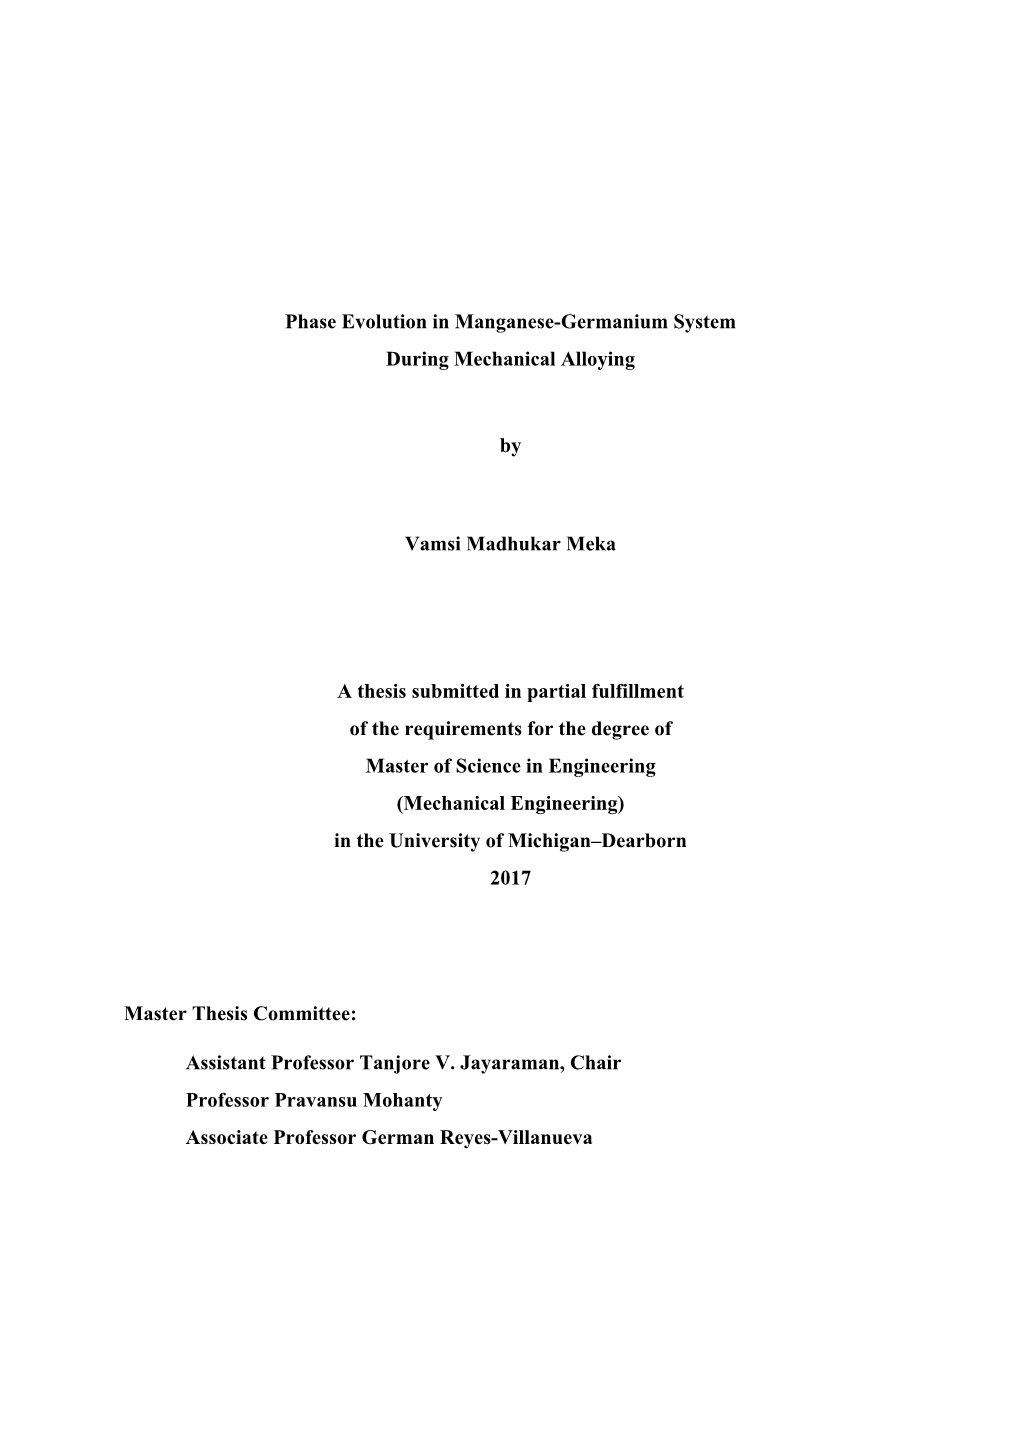 Phase Evolution in Manganese-Germanium System During Mechanical Alloying by Vamsi Madhukar Meka a Thesis Submitted in Partial Fu